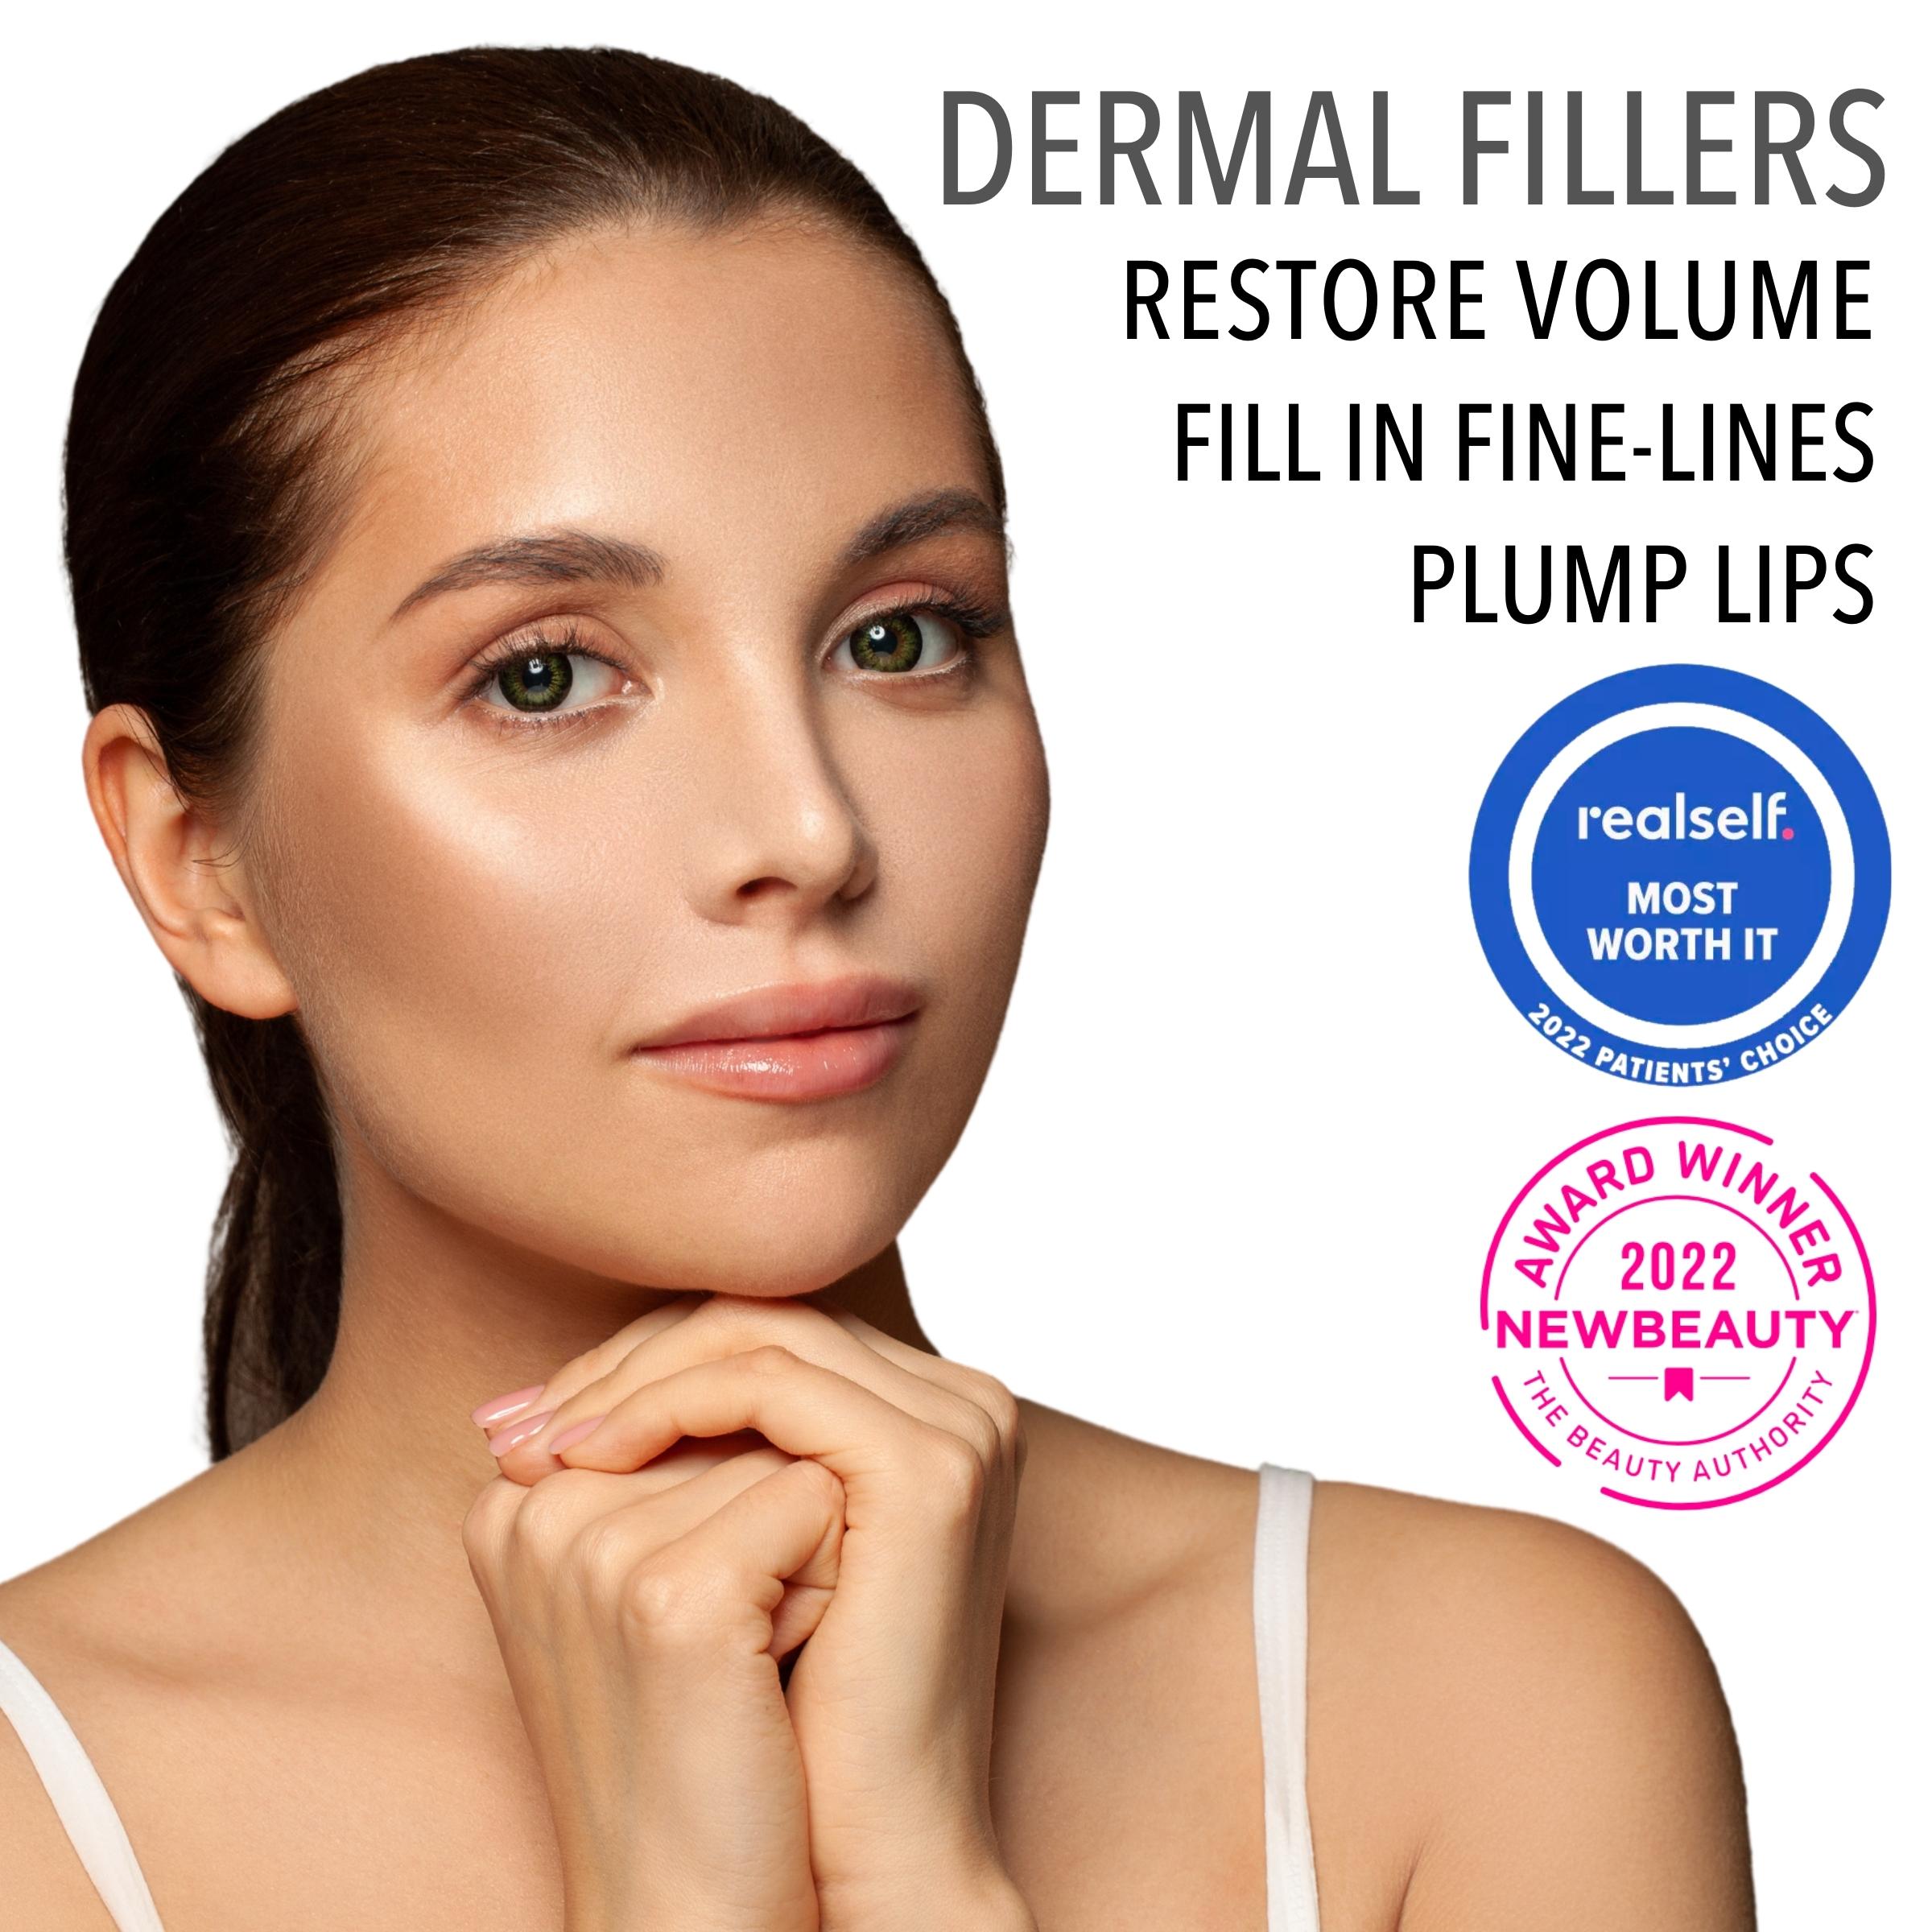 Young woman with a rejuvenated face promoting Juvéderm and Restylane fillers